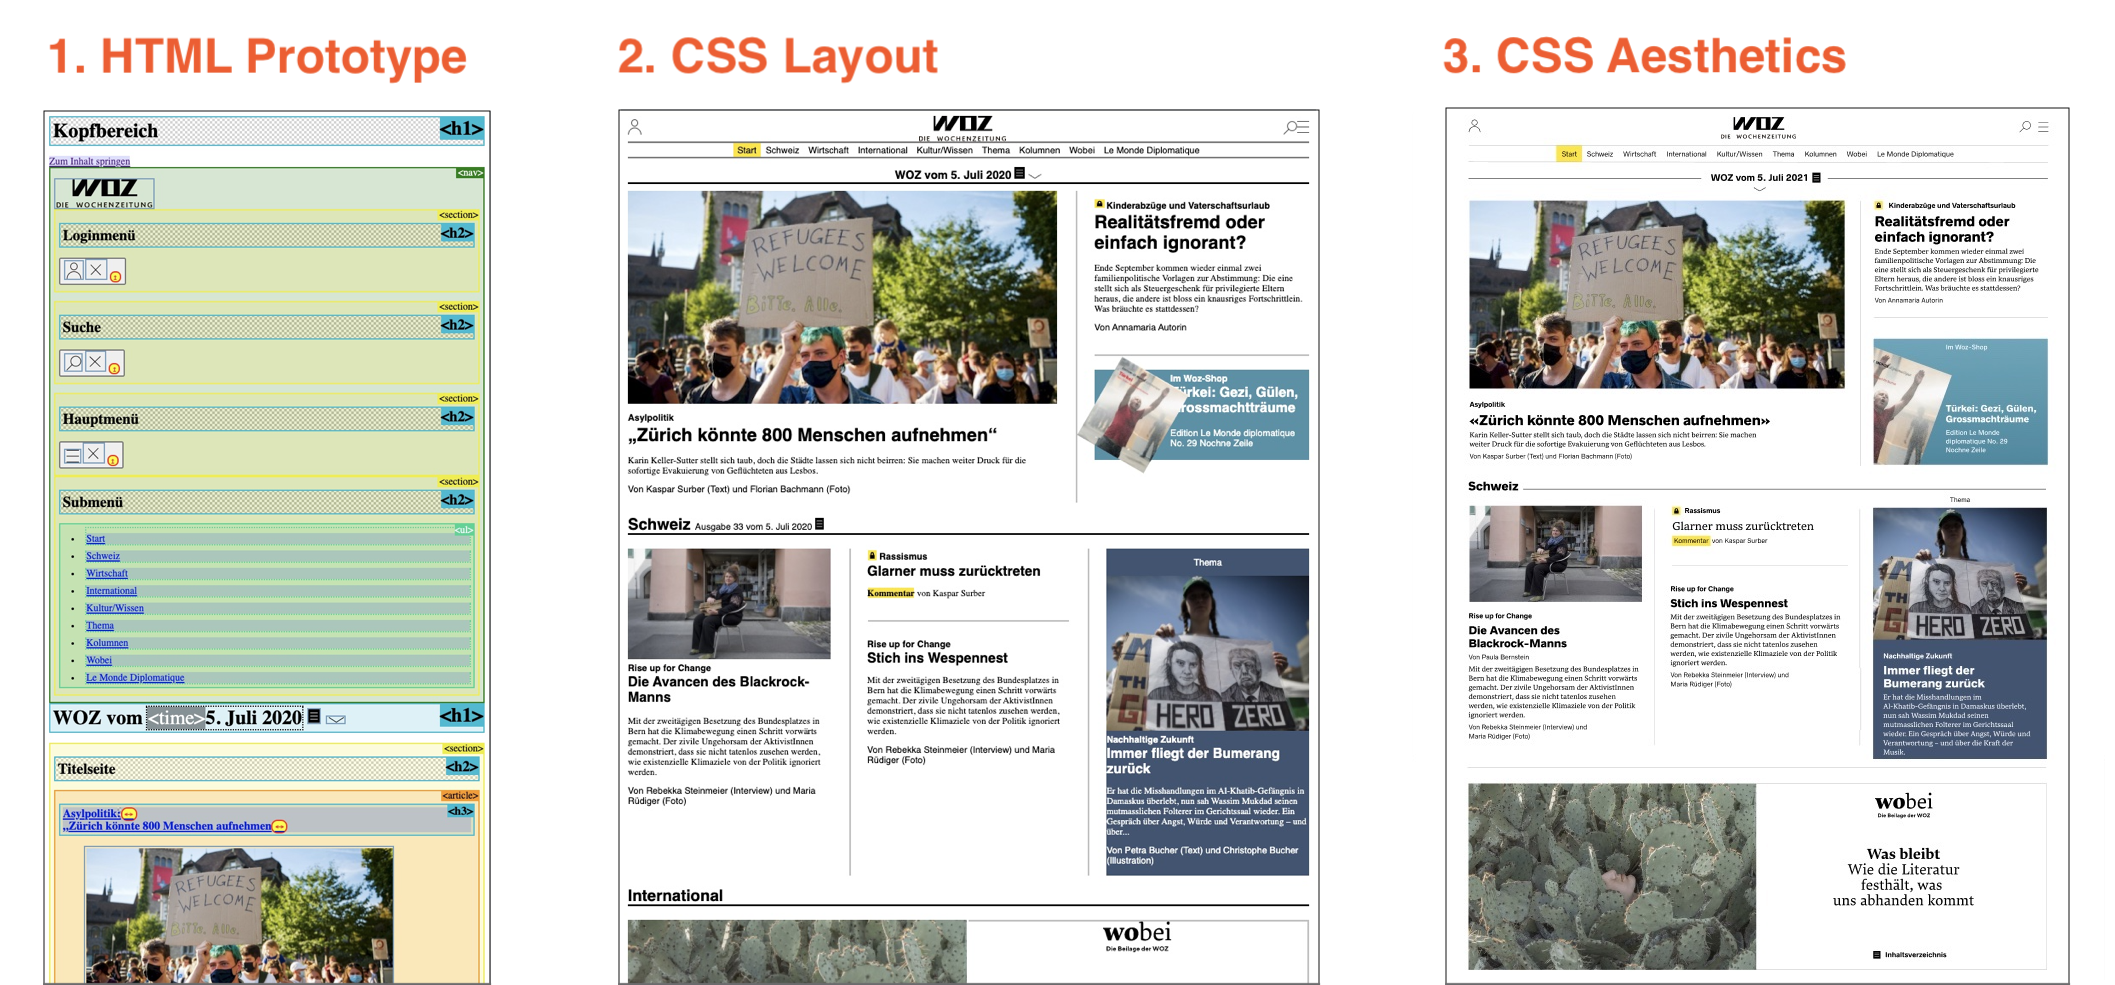 An image depicting three different documents: the HTML prototype, the content with CSS layout, and the content after having added CSS aesthetics.